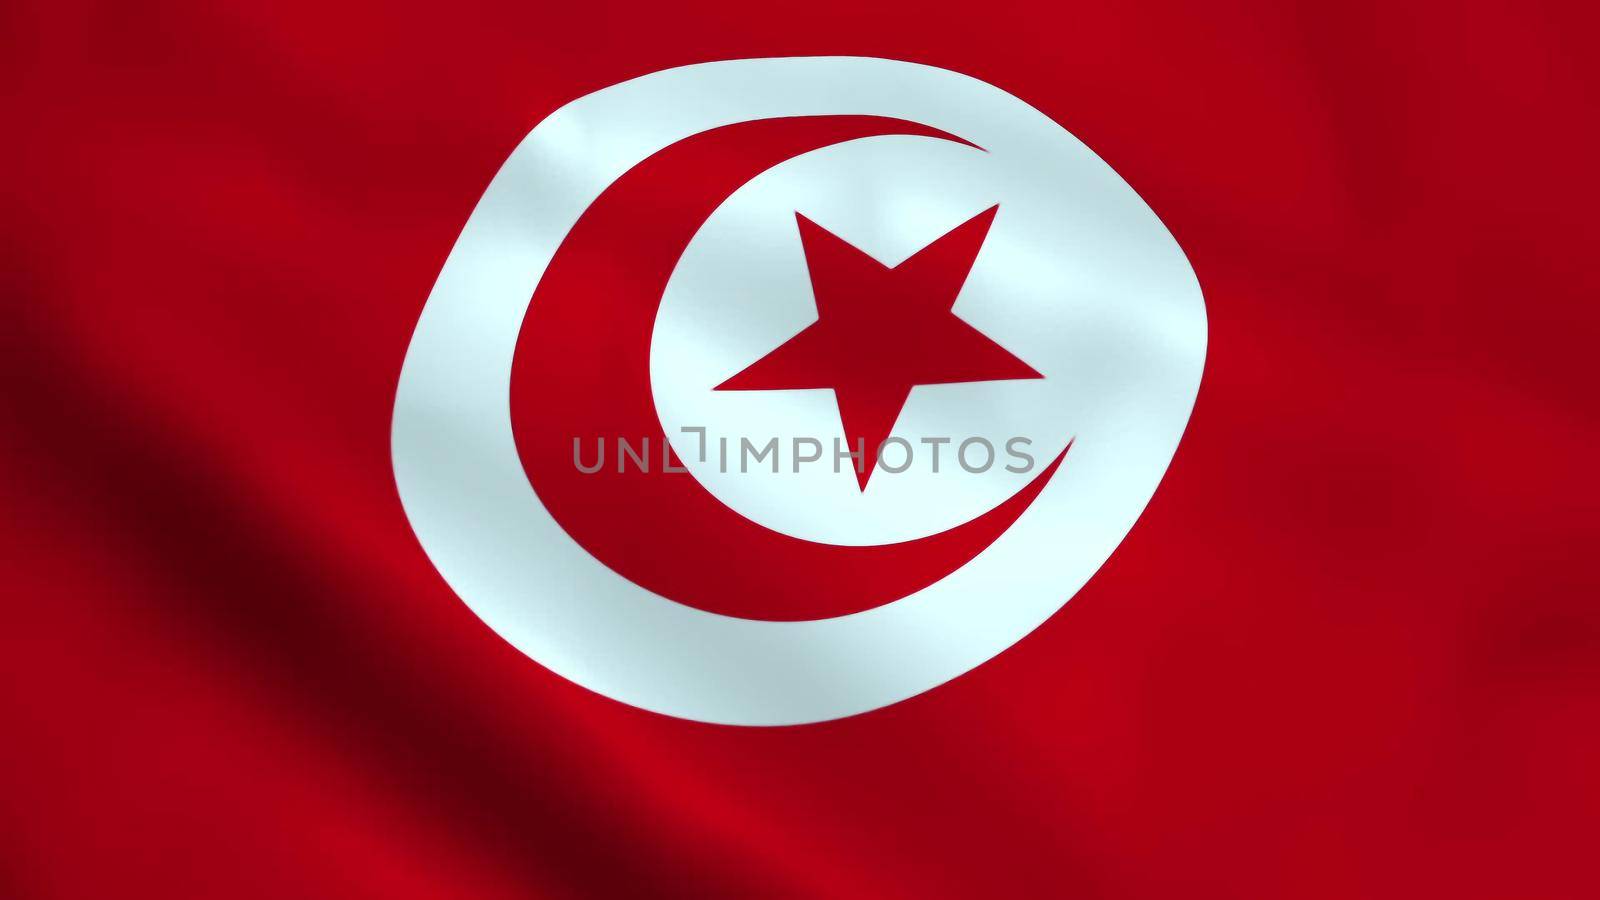 Realistic Tunisia flag 3D rendering by designprojects